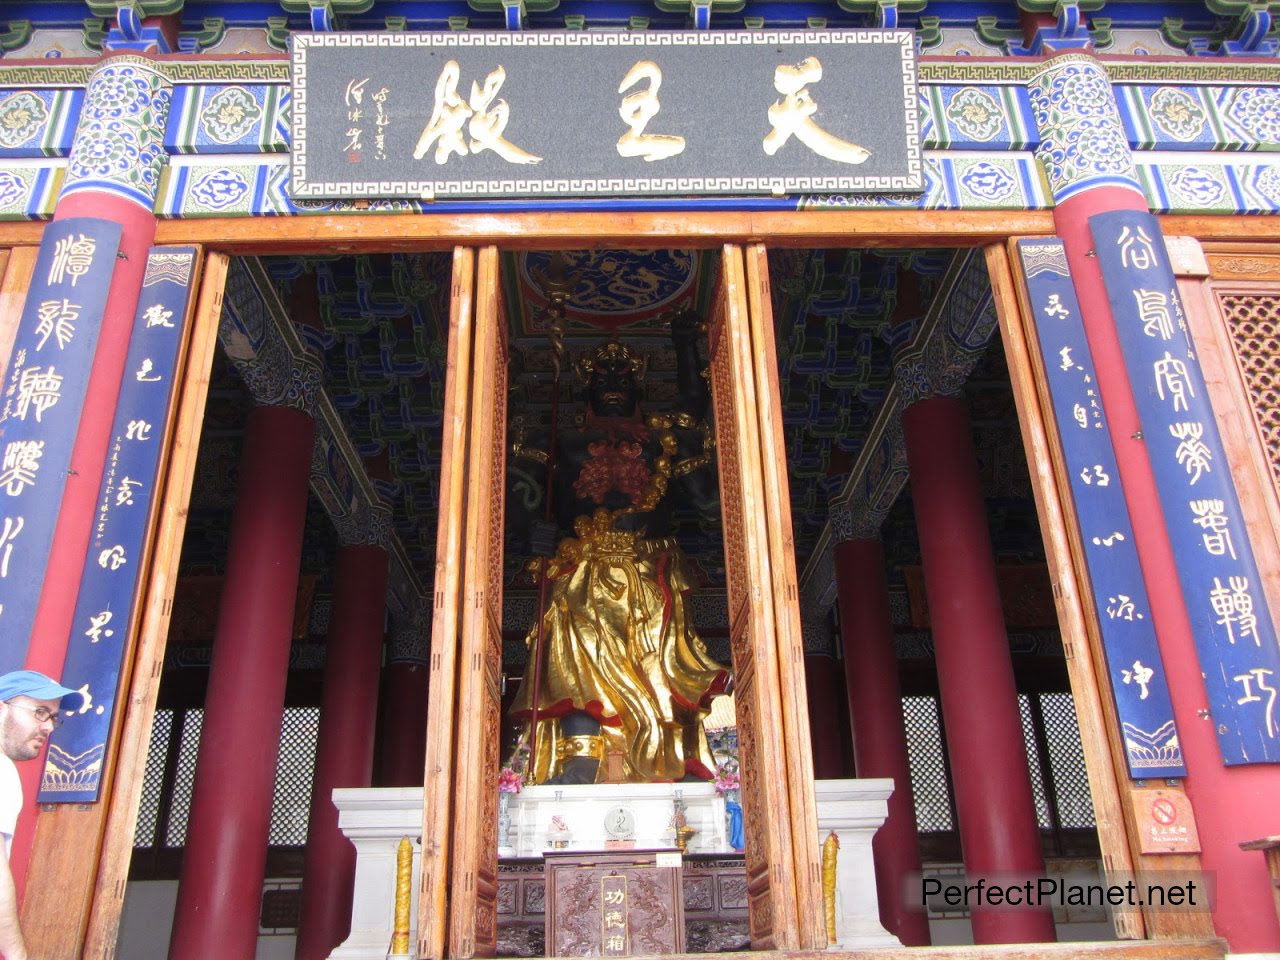 Inside of one of the temples